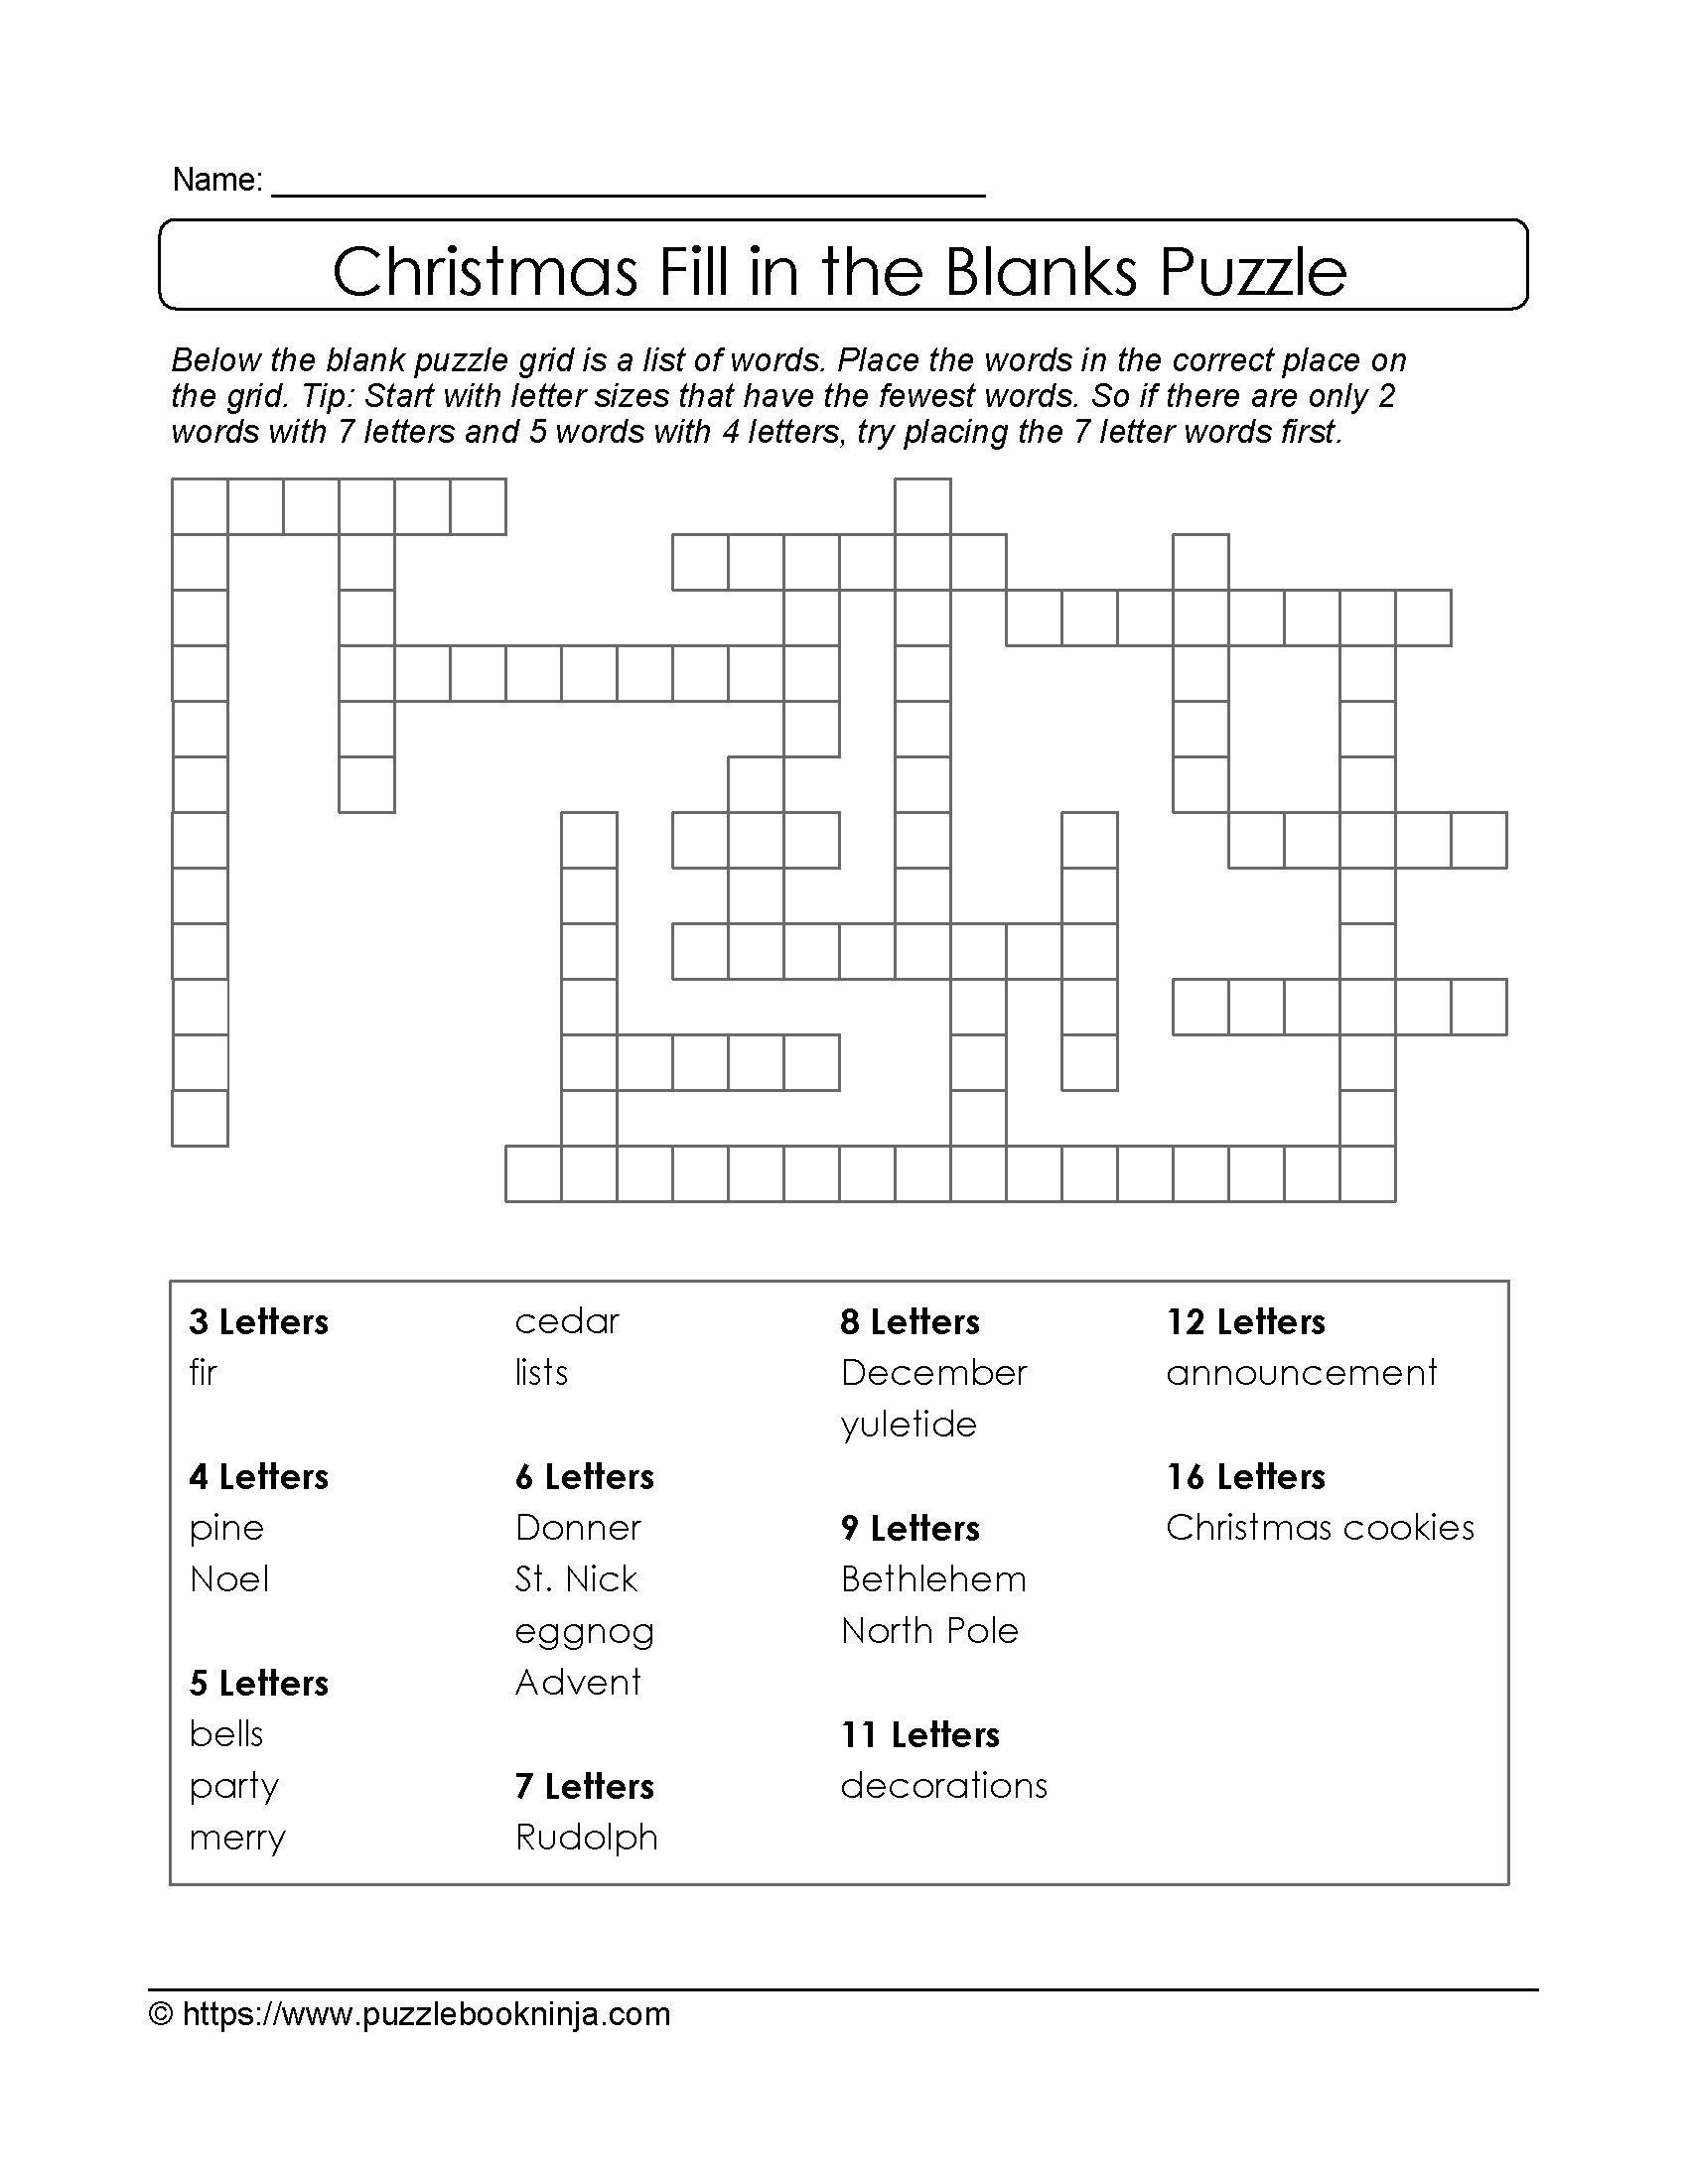 Christmas Printable Puzzle. Free Fill In The Blanks. | Christmas - Printable Puzzles Christmas